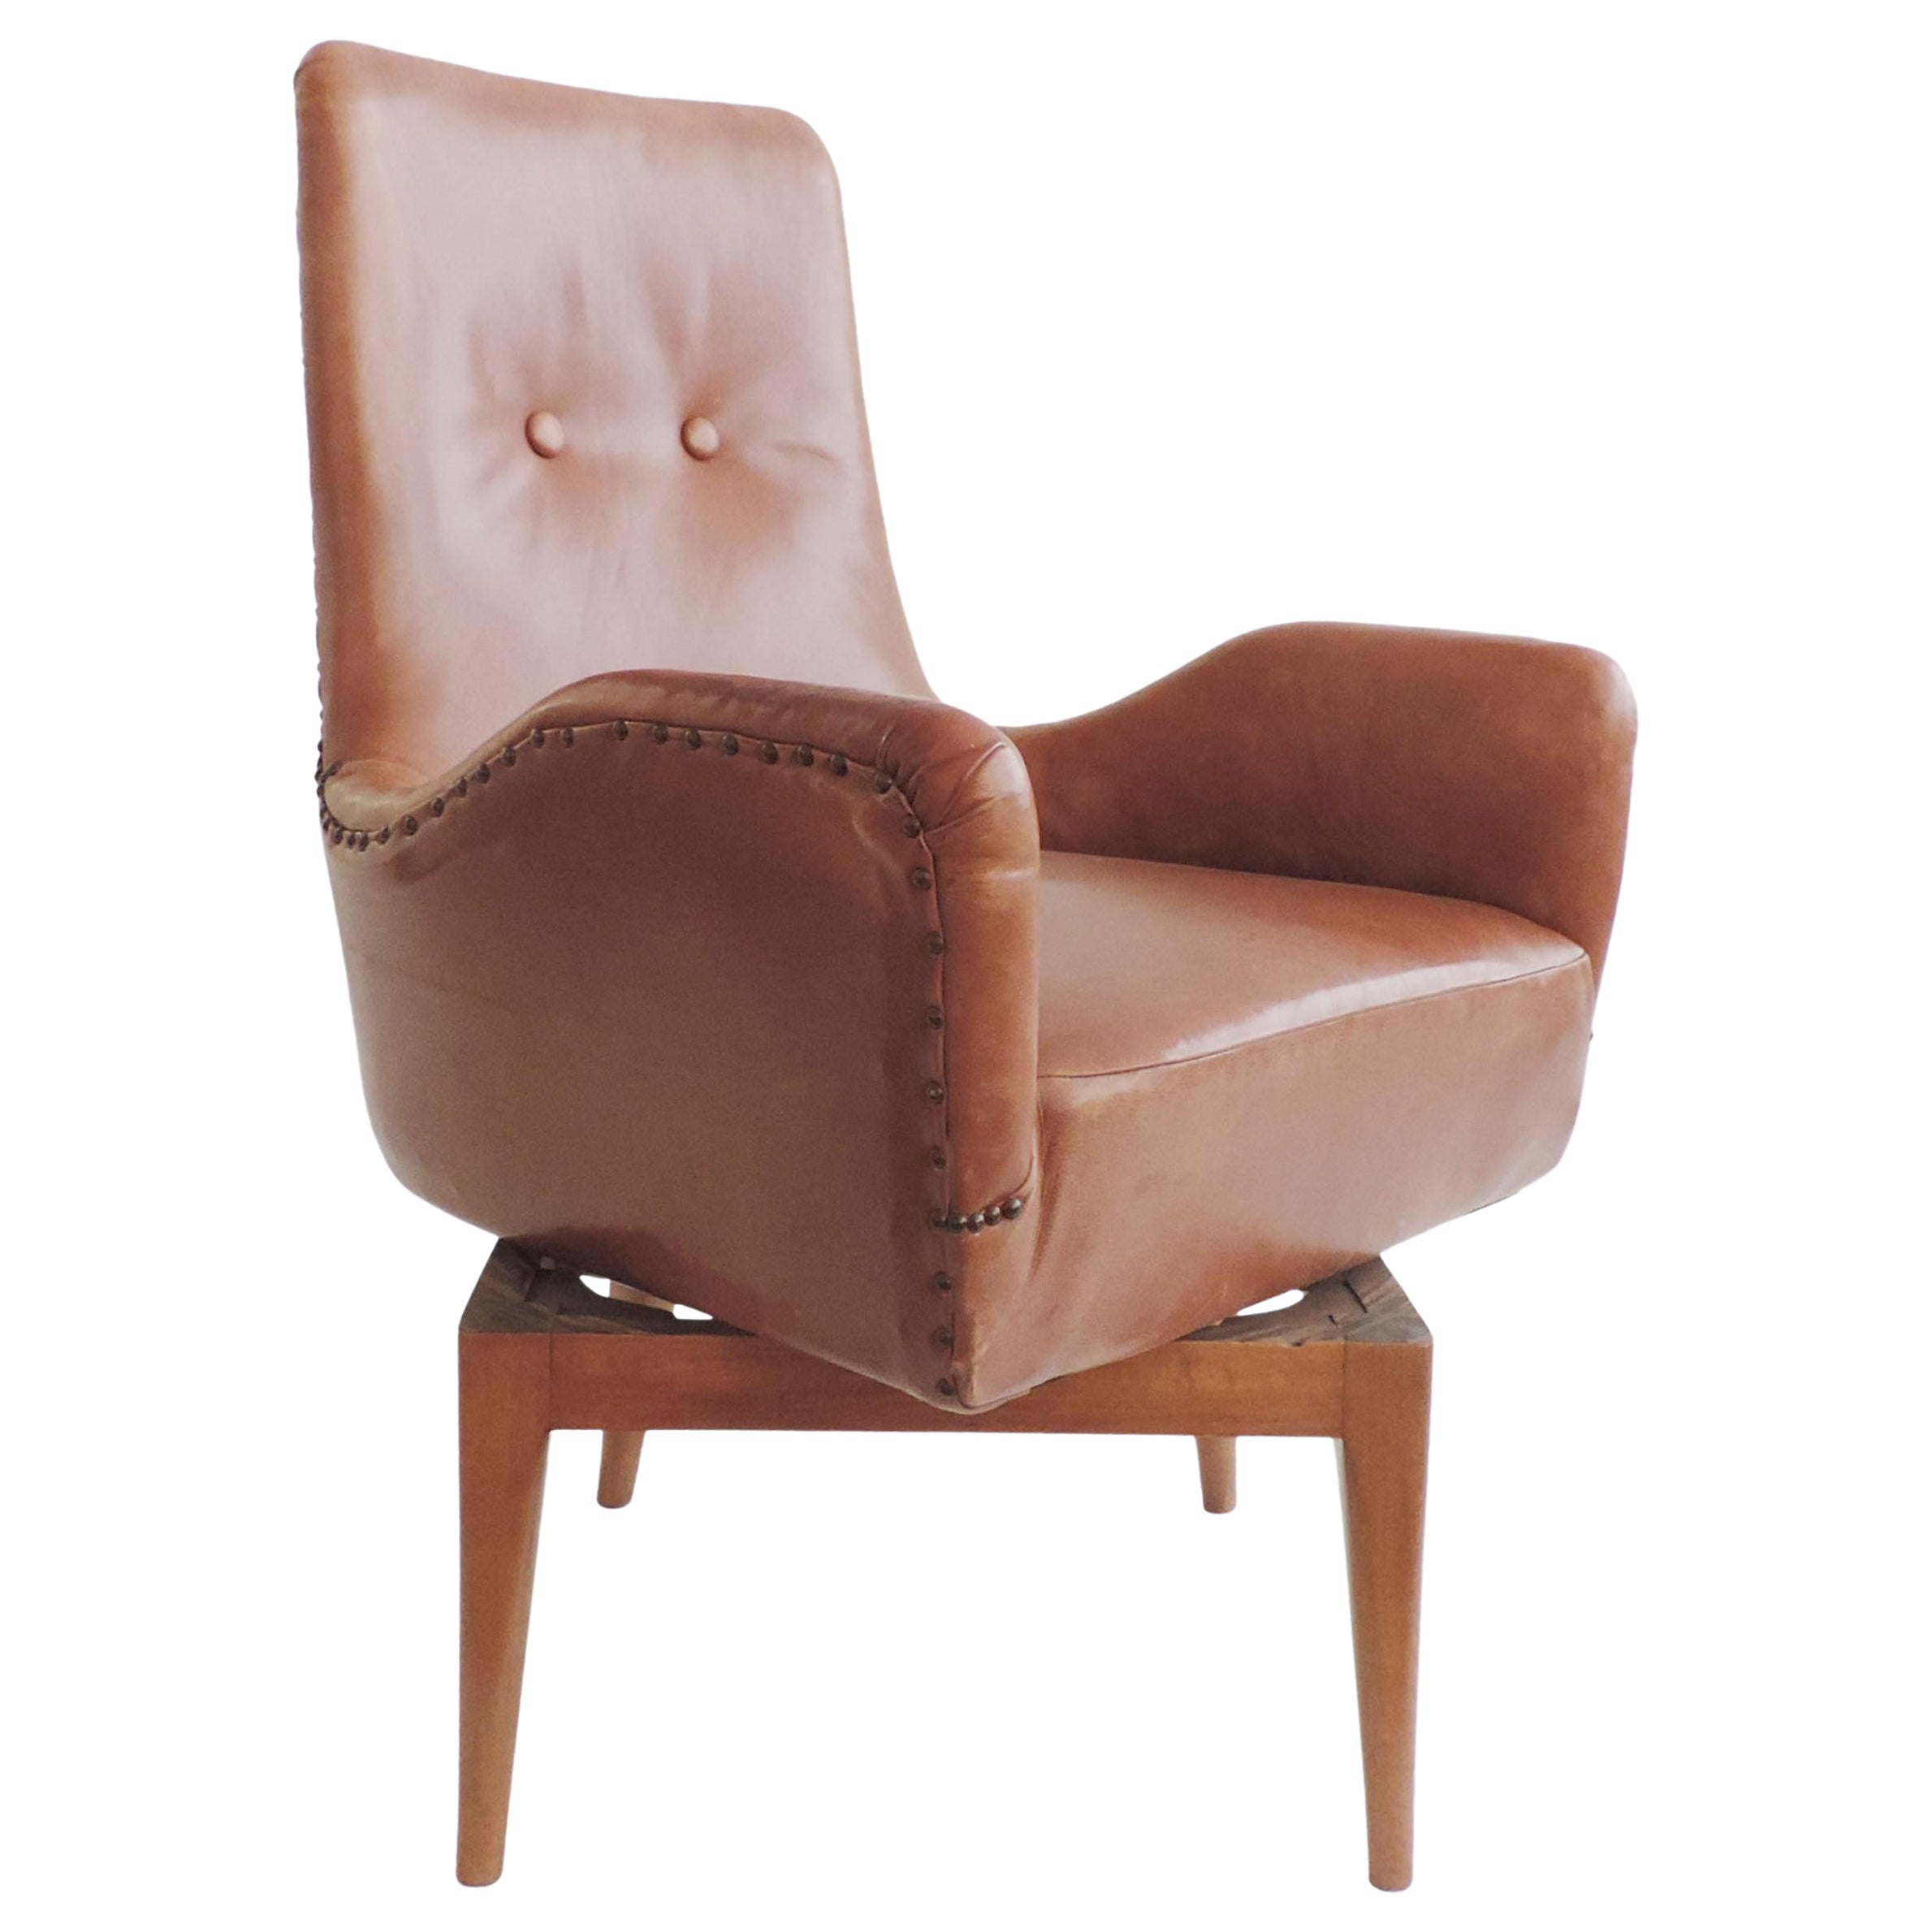 Giovanni Gariboldi Swivel Chair in Leather and Wood, Italy, 1940s For Sale